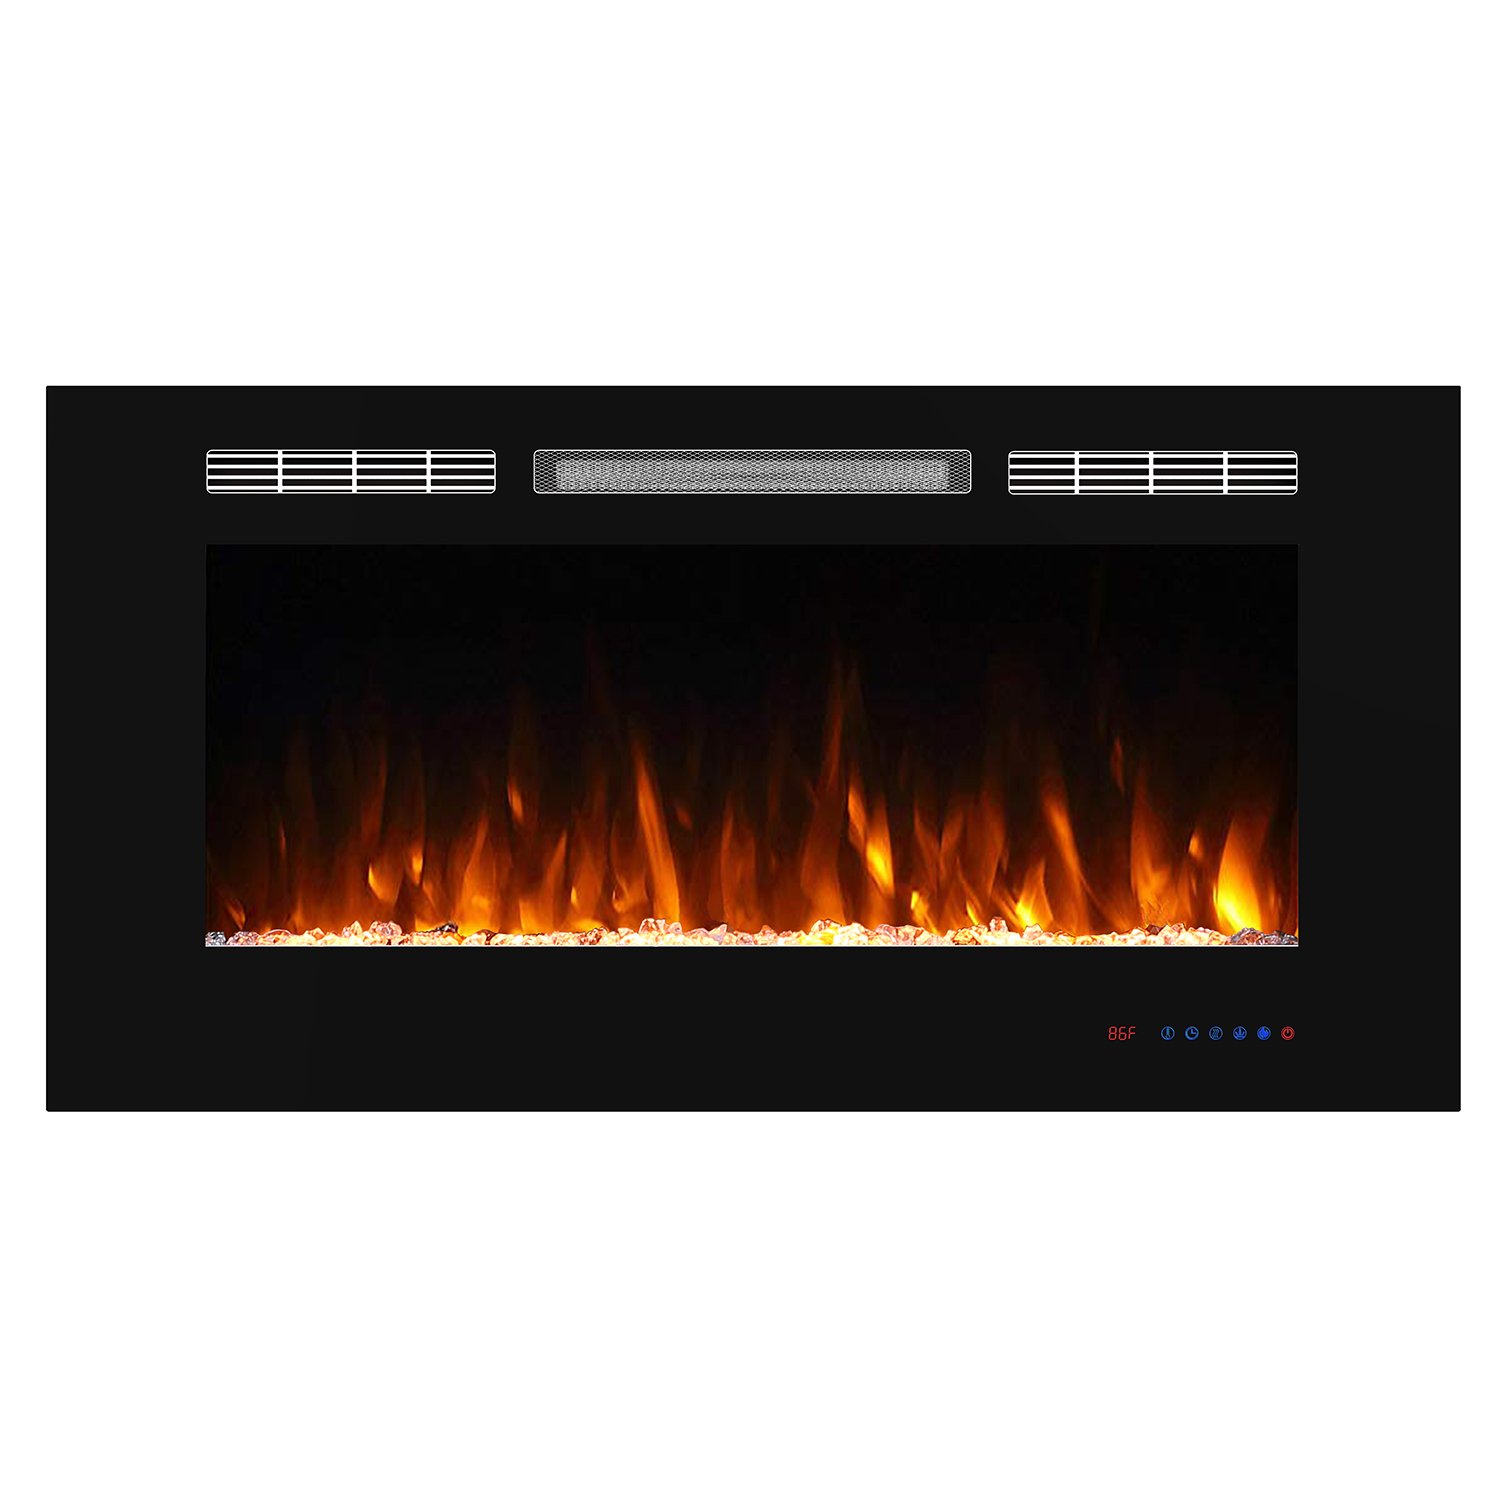 42 in. Electric Fireplace, Recessed Fireplace Insert with Remote Control in Black-CASAINC